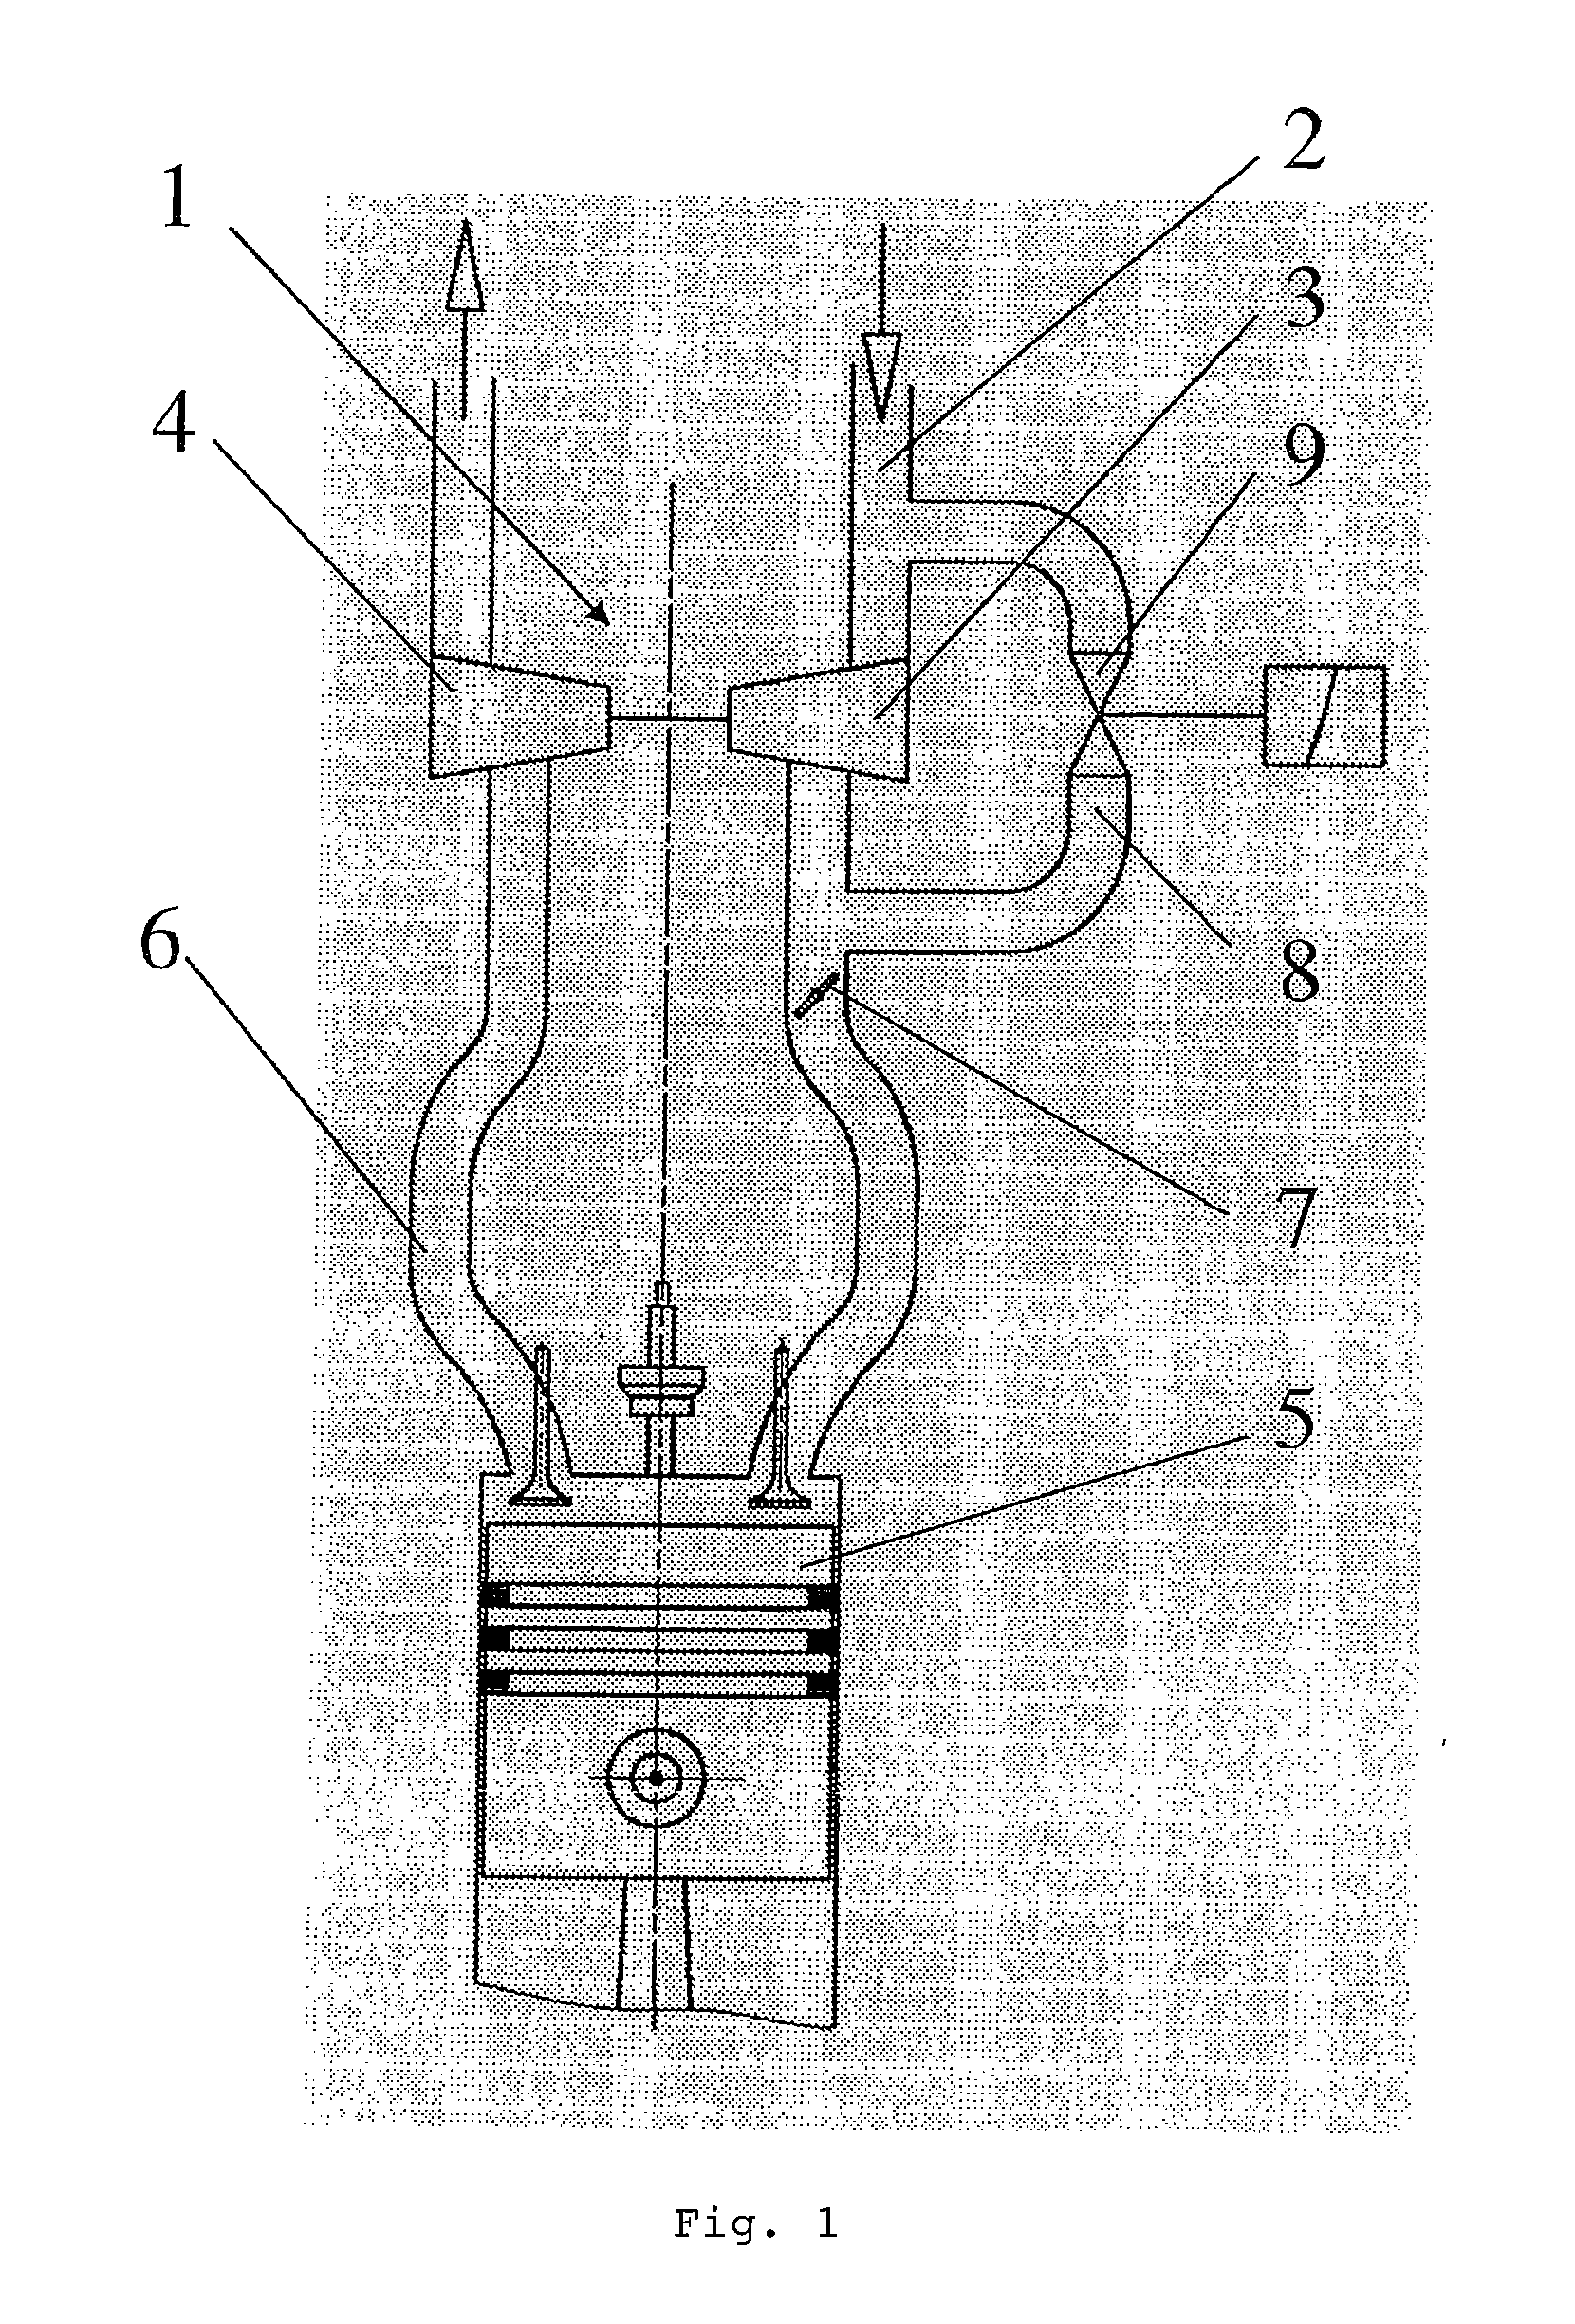 Ambient-air pulsed valve for internal combustion engines equipped with a turbocharger